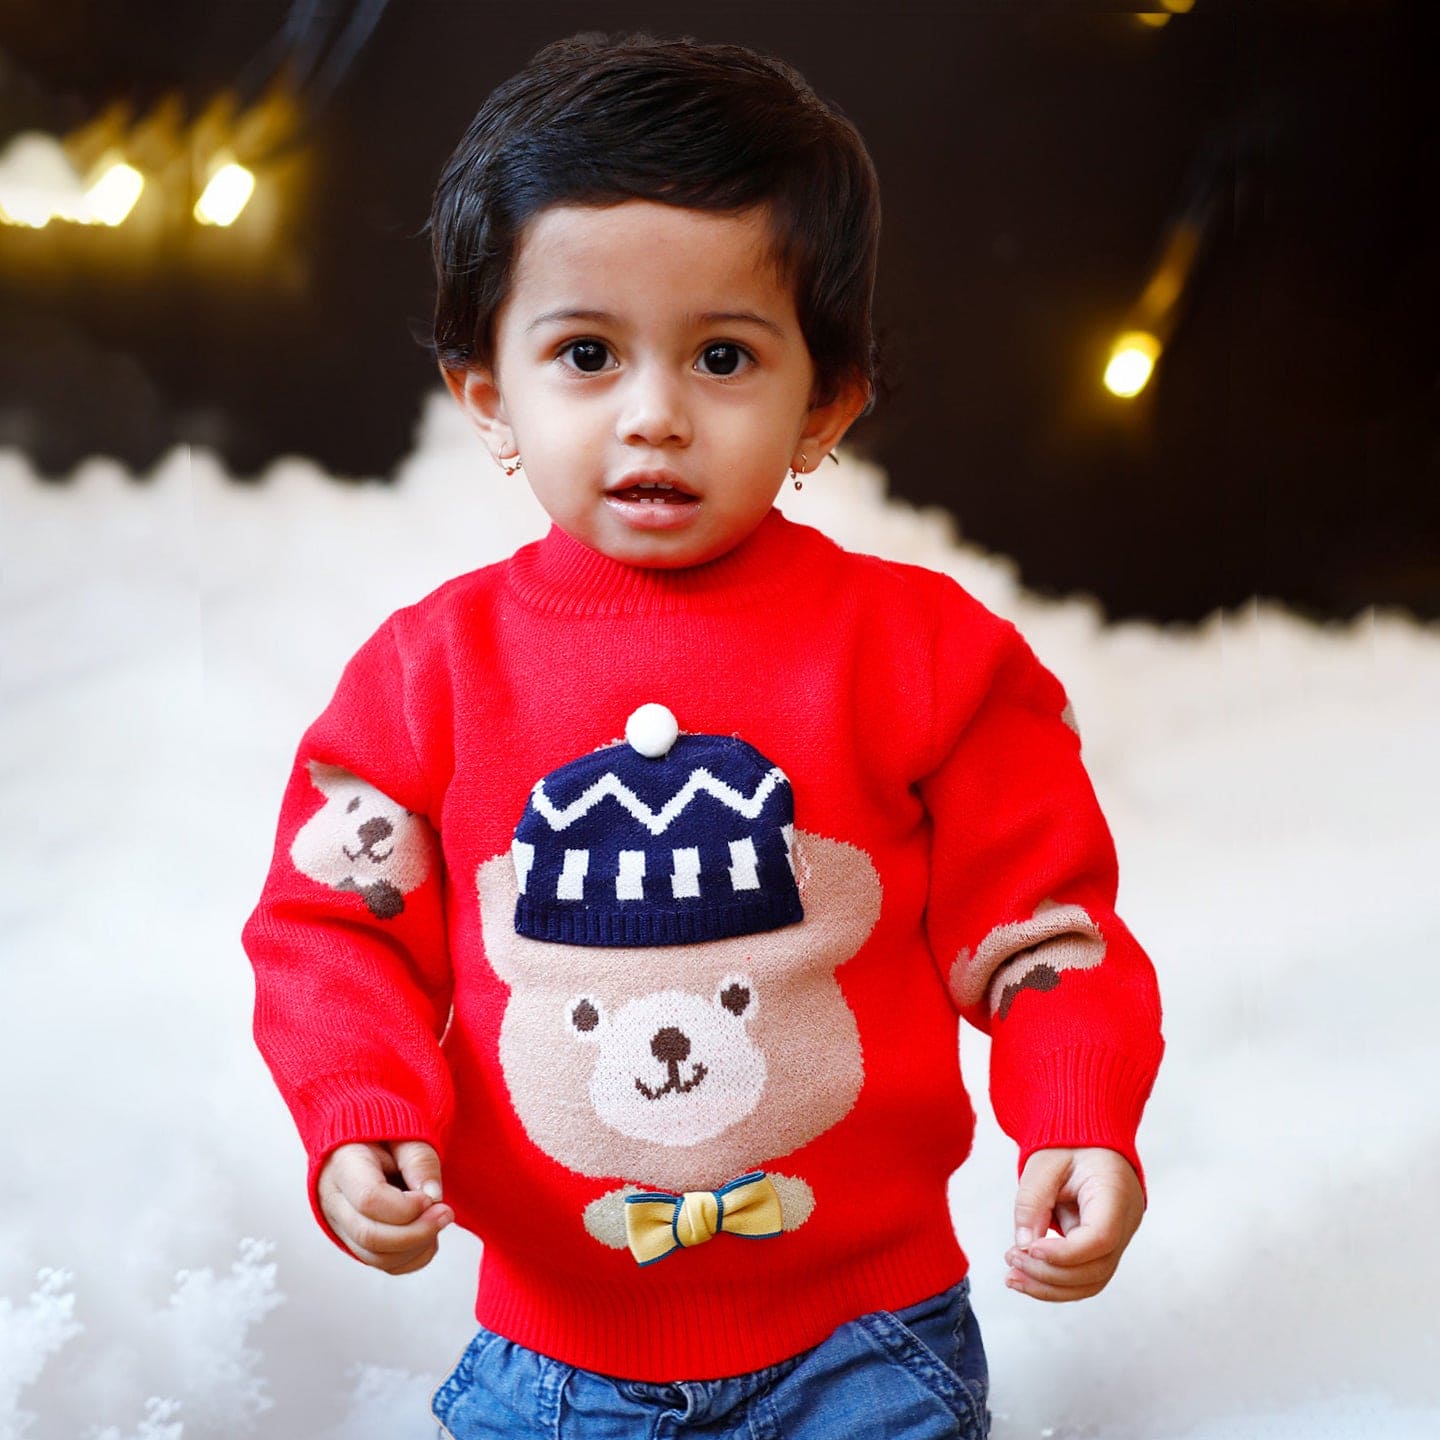 Mr. Bear Premium Full Sleeves Knitted Sweater With 3D Applique - Red